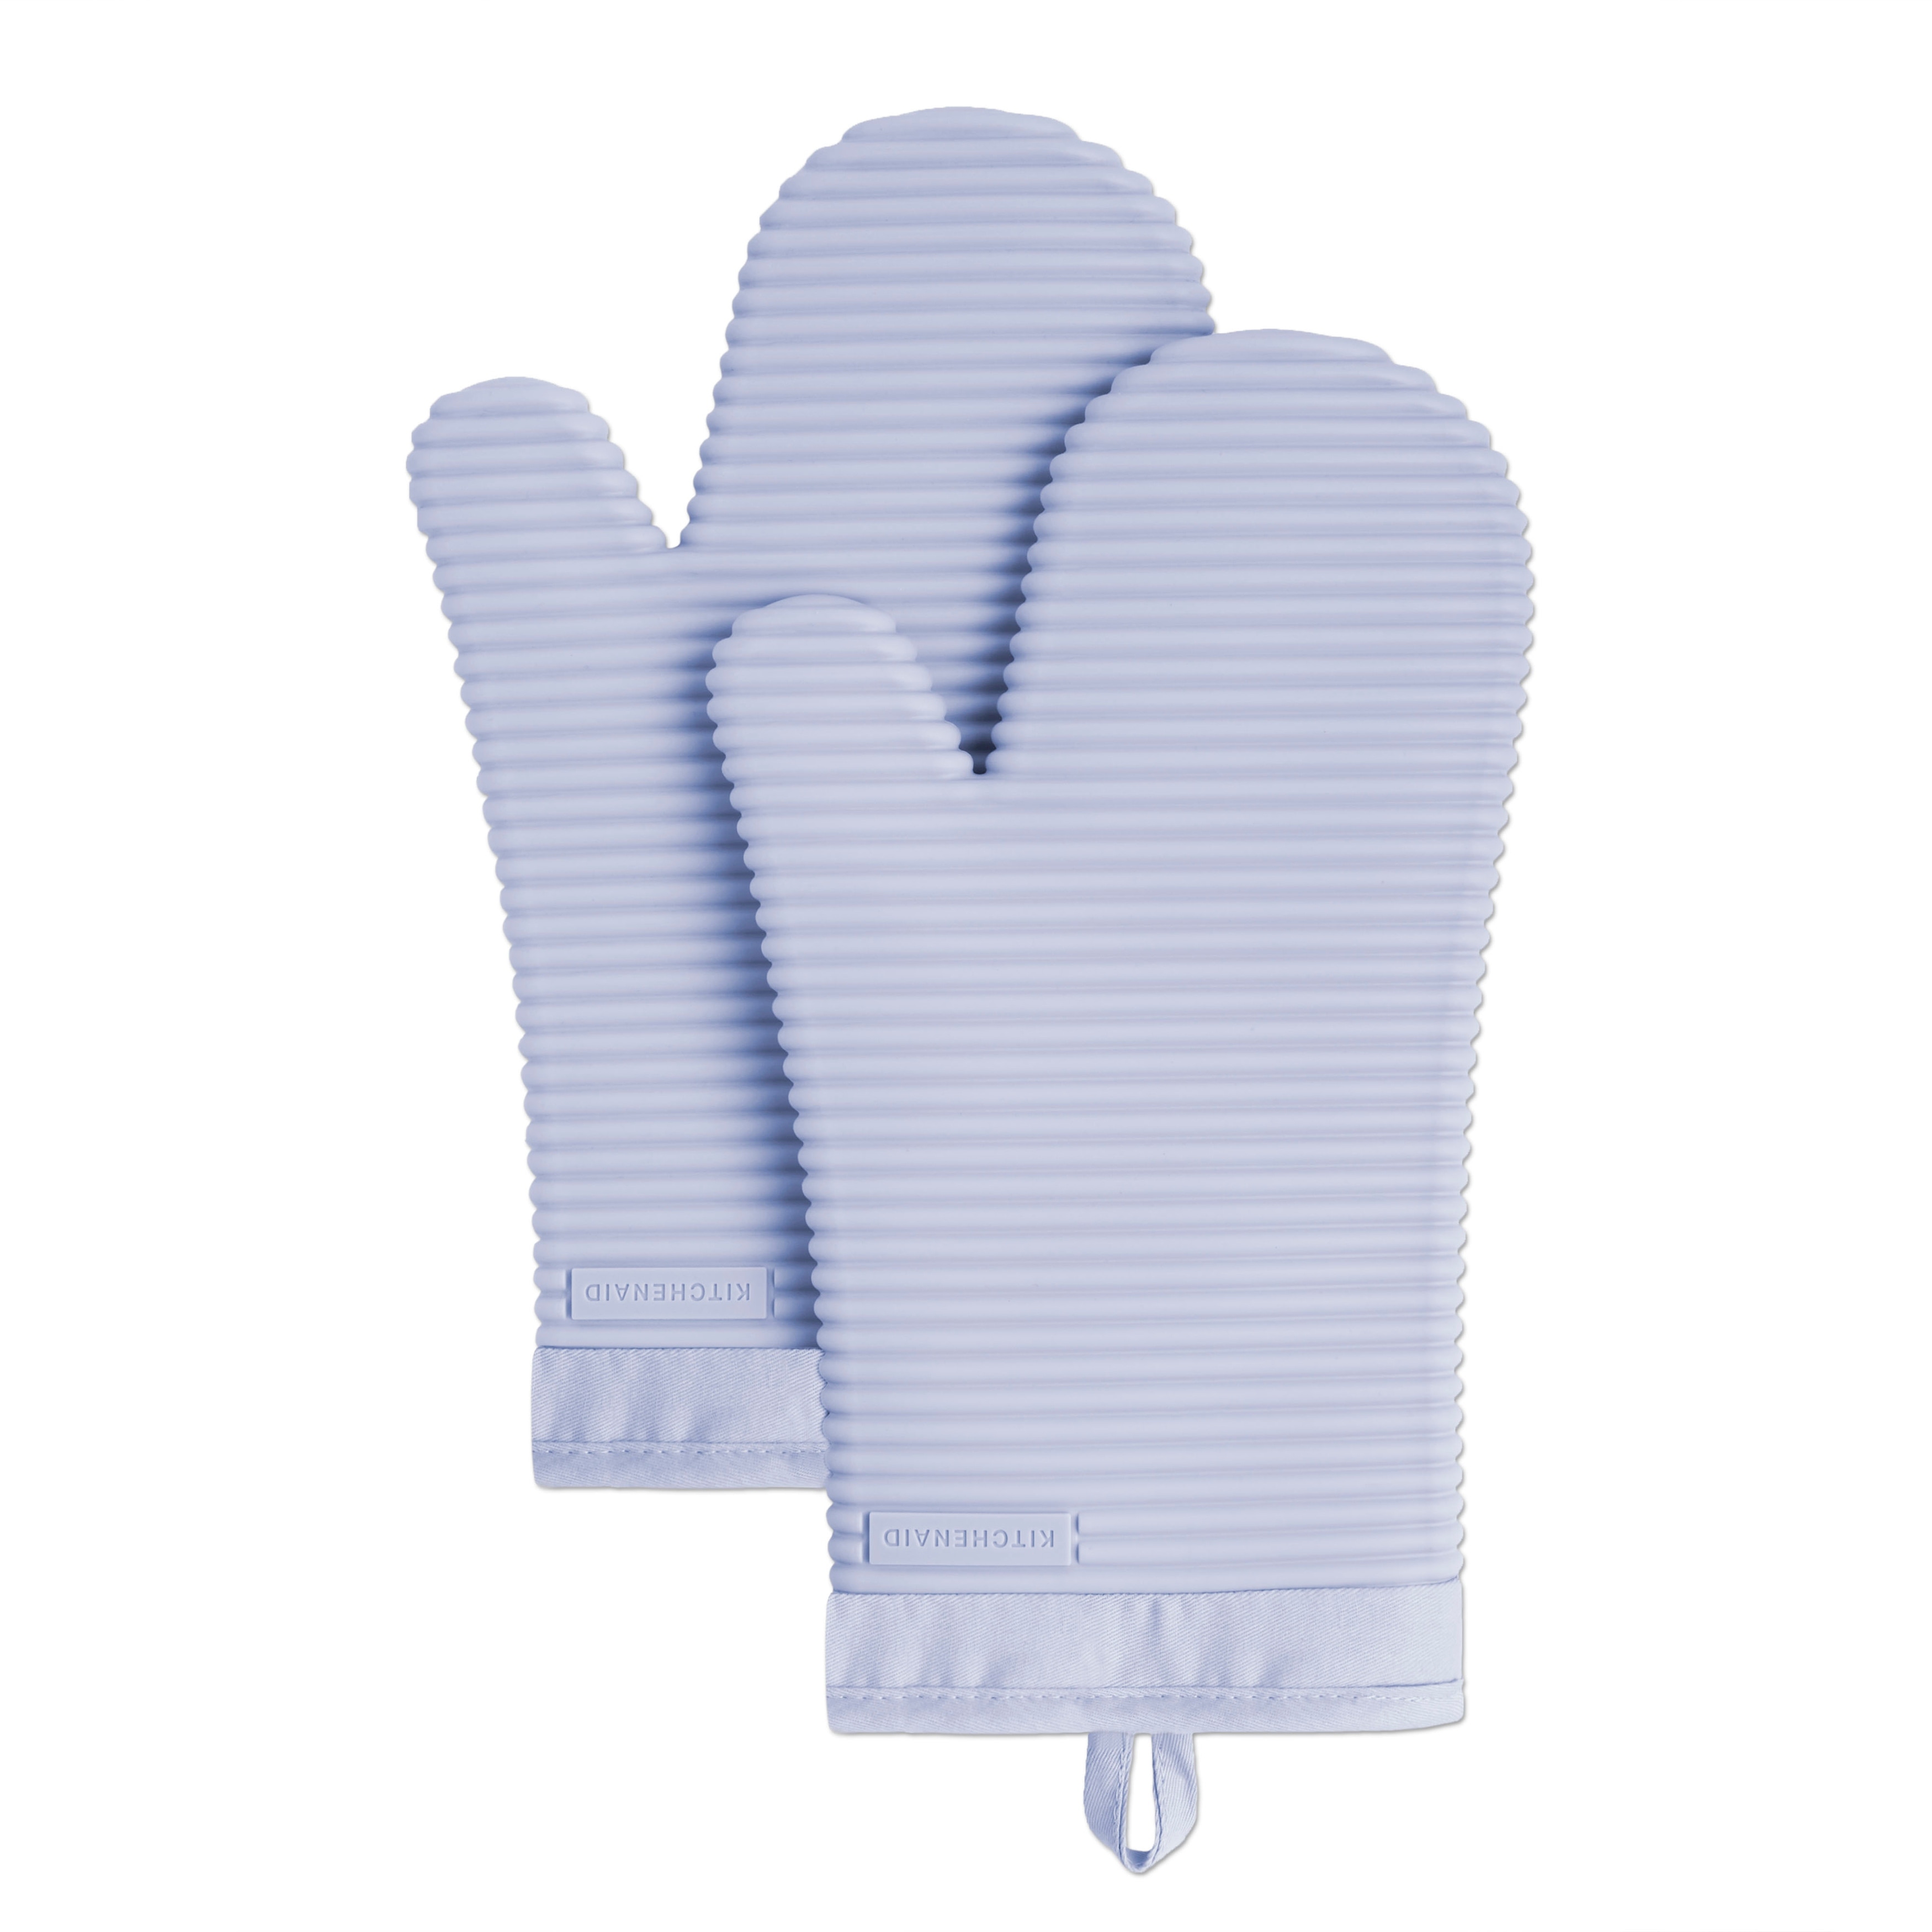 https://ak1.ostkcdn.com/images/products/is/images/direct/3aa4994665f8dc8c25f387e7ce12ef6f8f3ae3e7/KitchenAid-Ribbed-Soft-Silicone-Oven-Mitt-Set%2C-7.5%22x13%22%2C-2-Pack.jpg